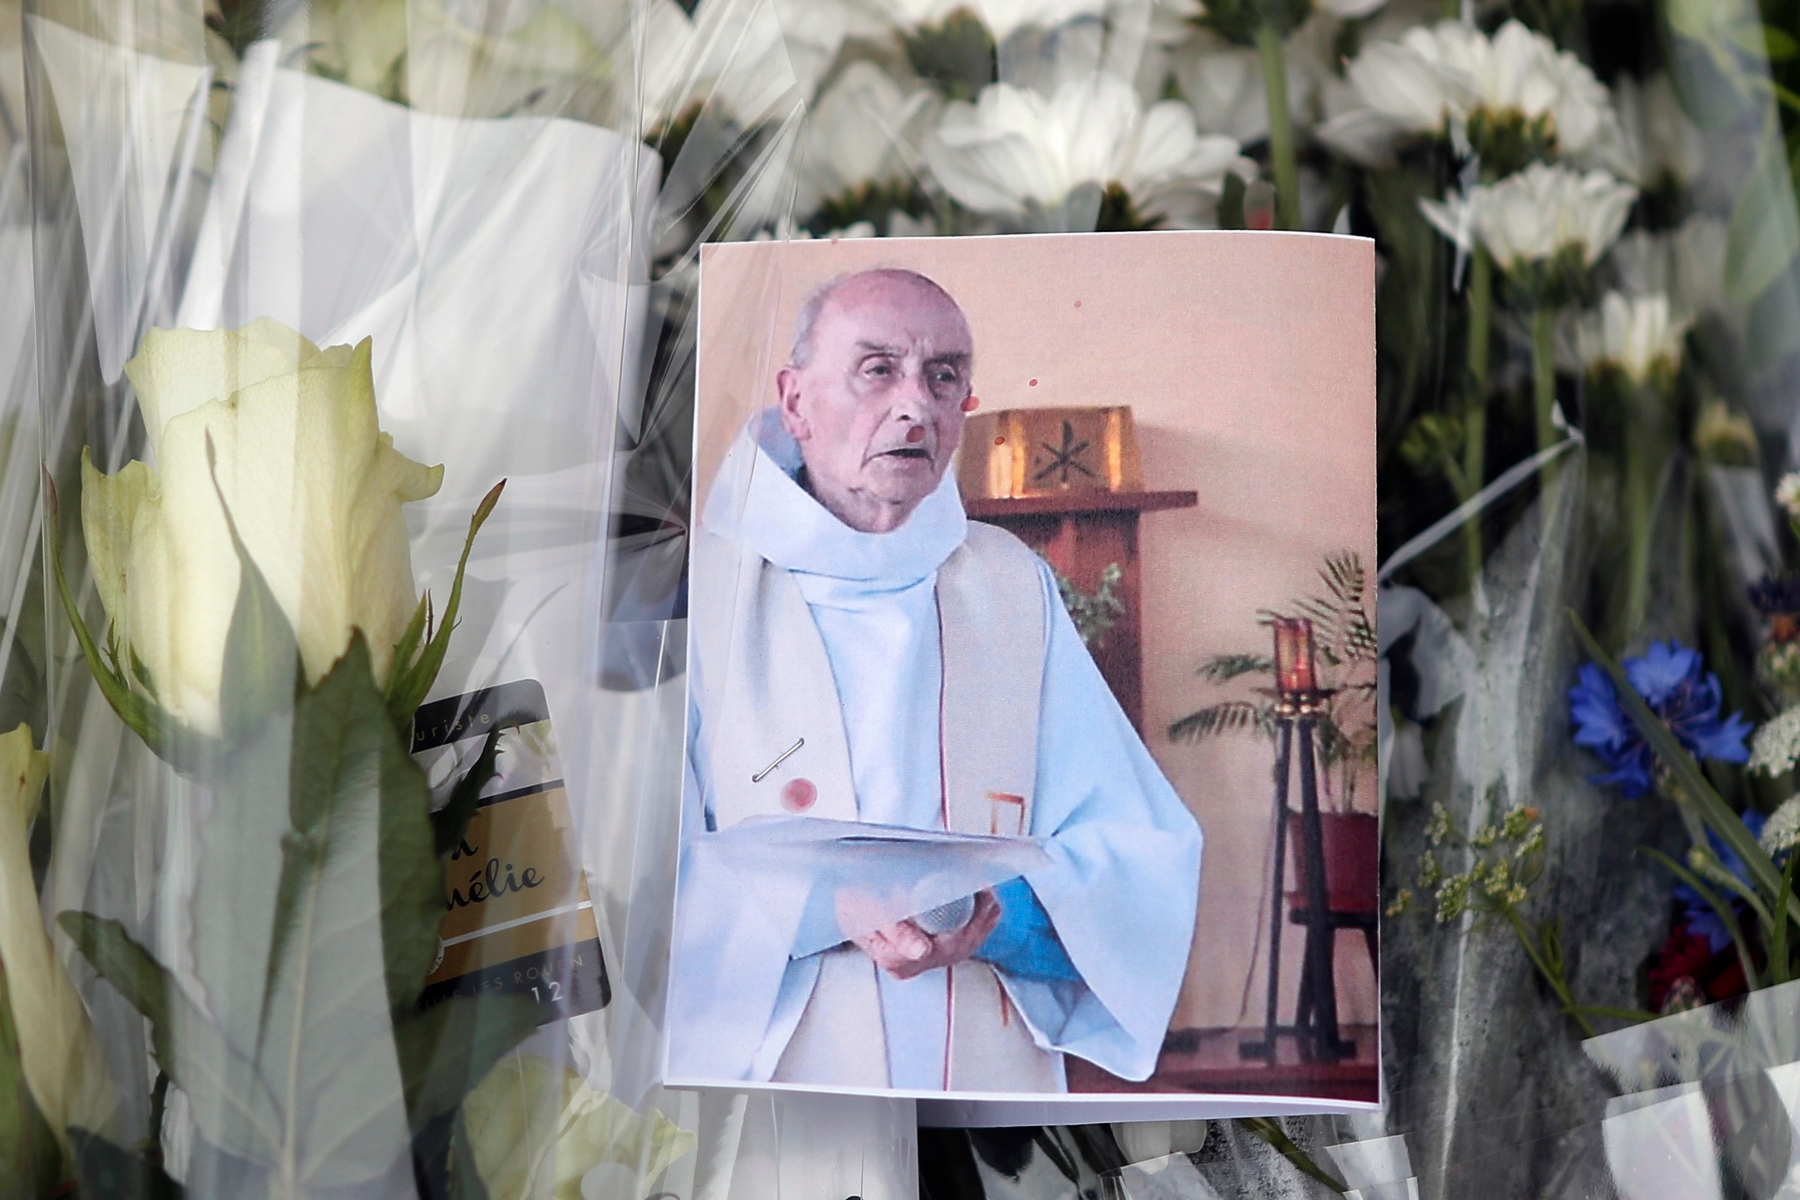 A picture of late Father Jacques Hamel is placed on flowers at the makeshift memorial in front of the city hall closed to the church where an hostage taking left a priest dead the day before in Saint-Etienne-du-Rouvray, Normandy, France, Wednesday, July 27, 2016. The Islamic State group crossed a new threshold Tuesday in its war against the West, as two of its followers targeted a church in Normandy, slitting the throat of an elderly priest celebrating Mass and using hostages as human shields before being shot by police. (AP Photo/Francois Mori) France Hostage Taking